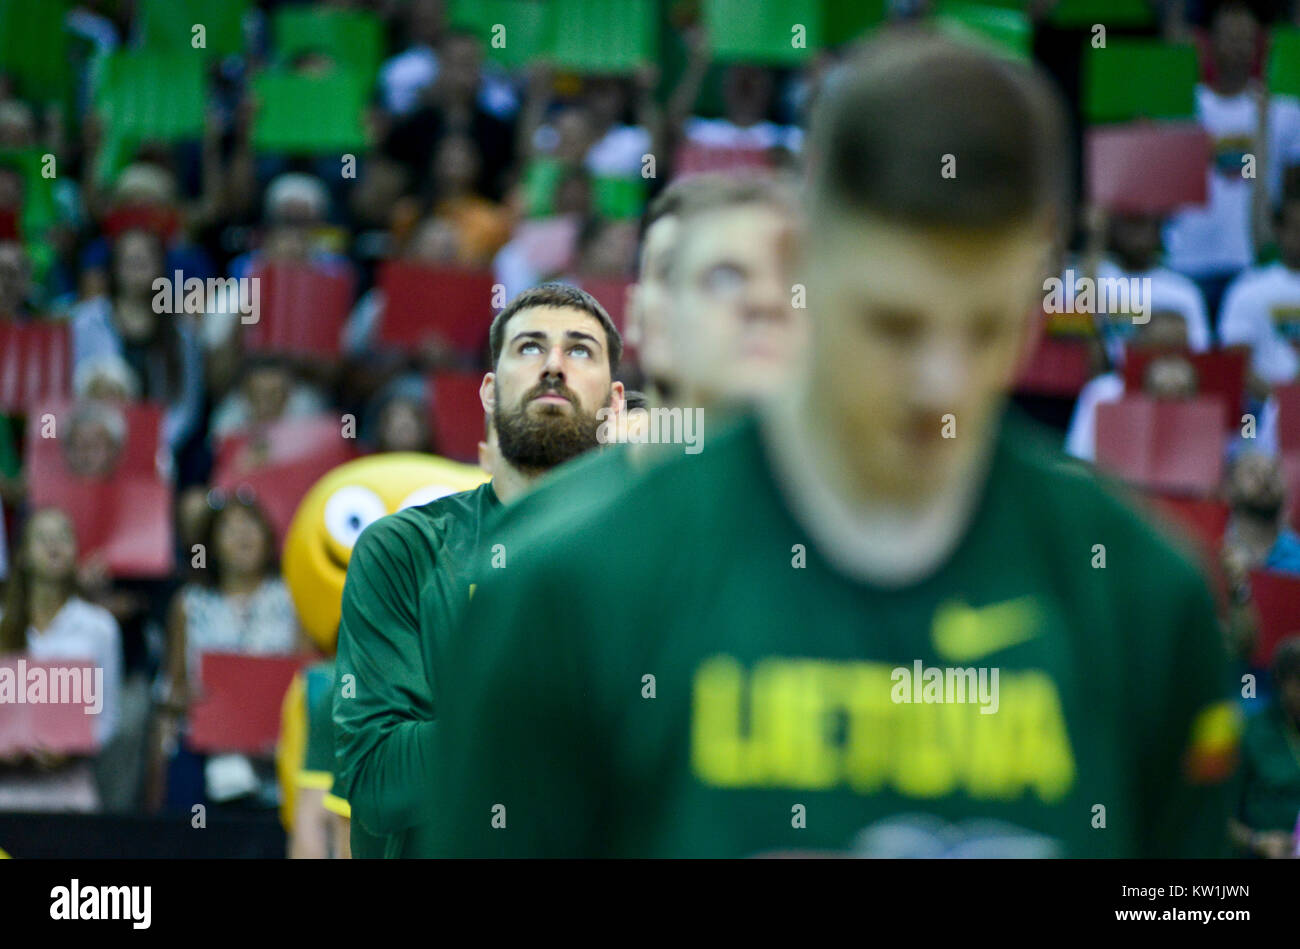 Lithuanian basketball national team standing during the national anthem Stock Photo